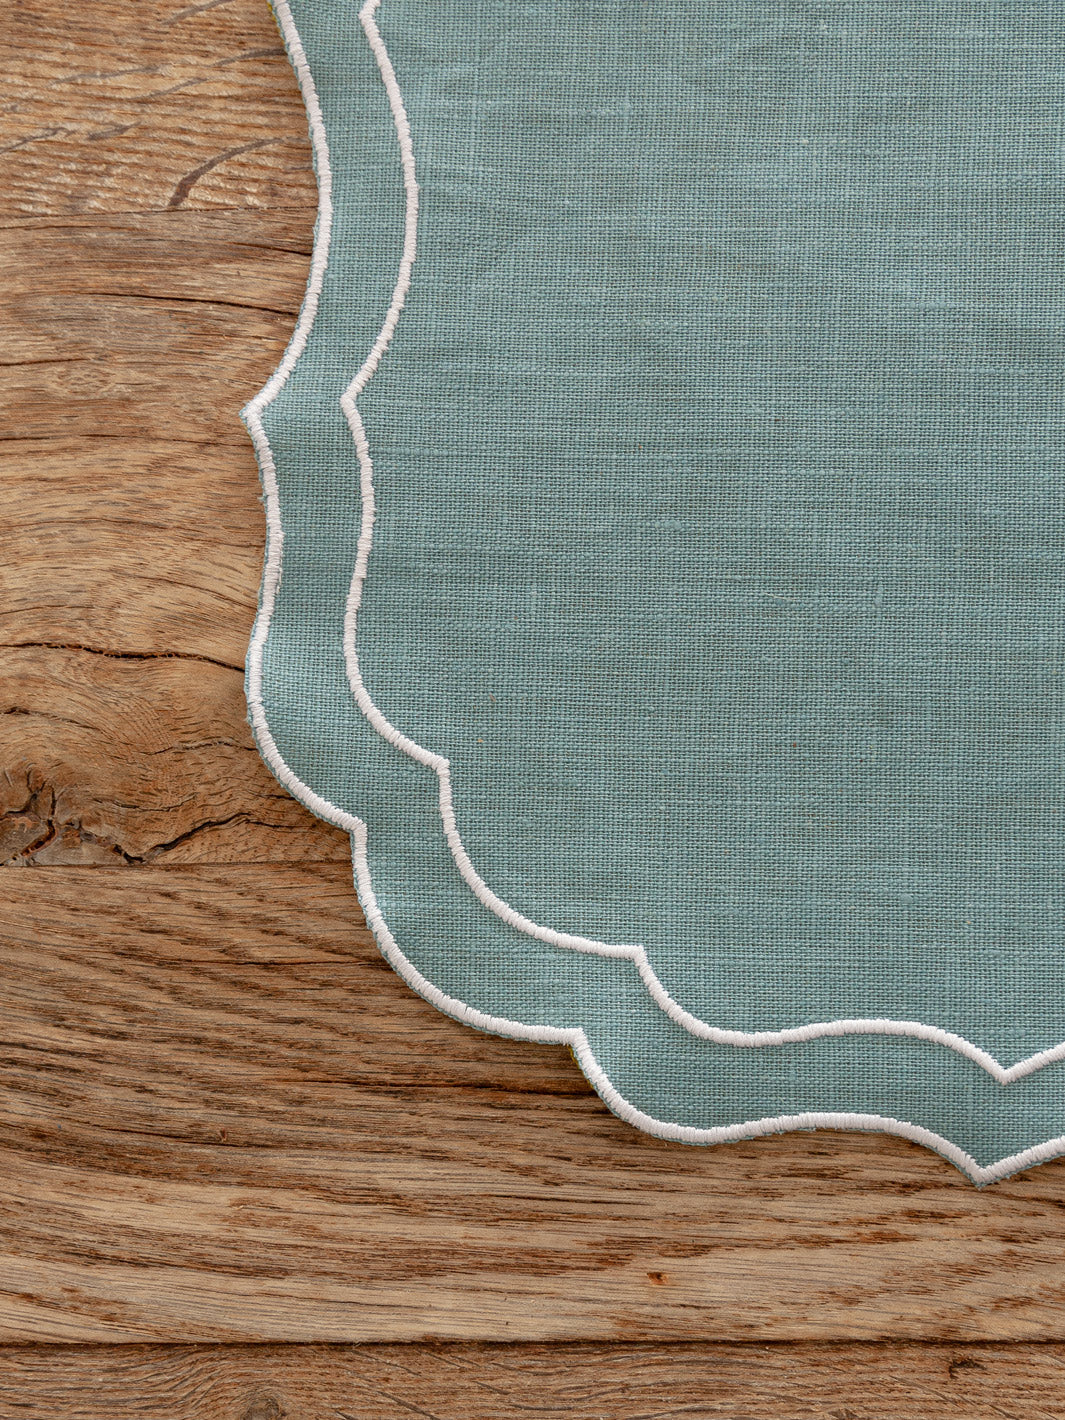 Square Placemat in Solesmes colored waxed linen